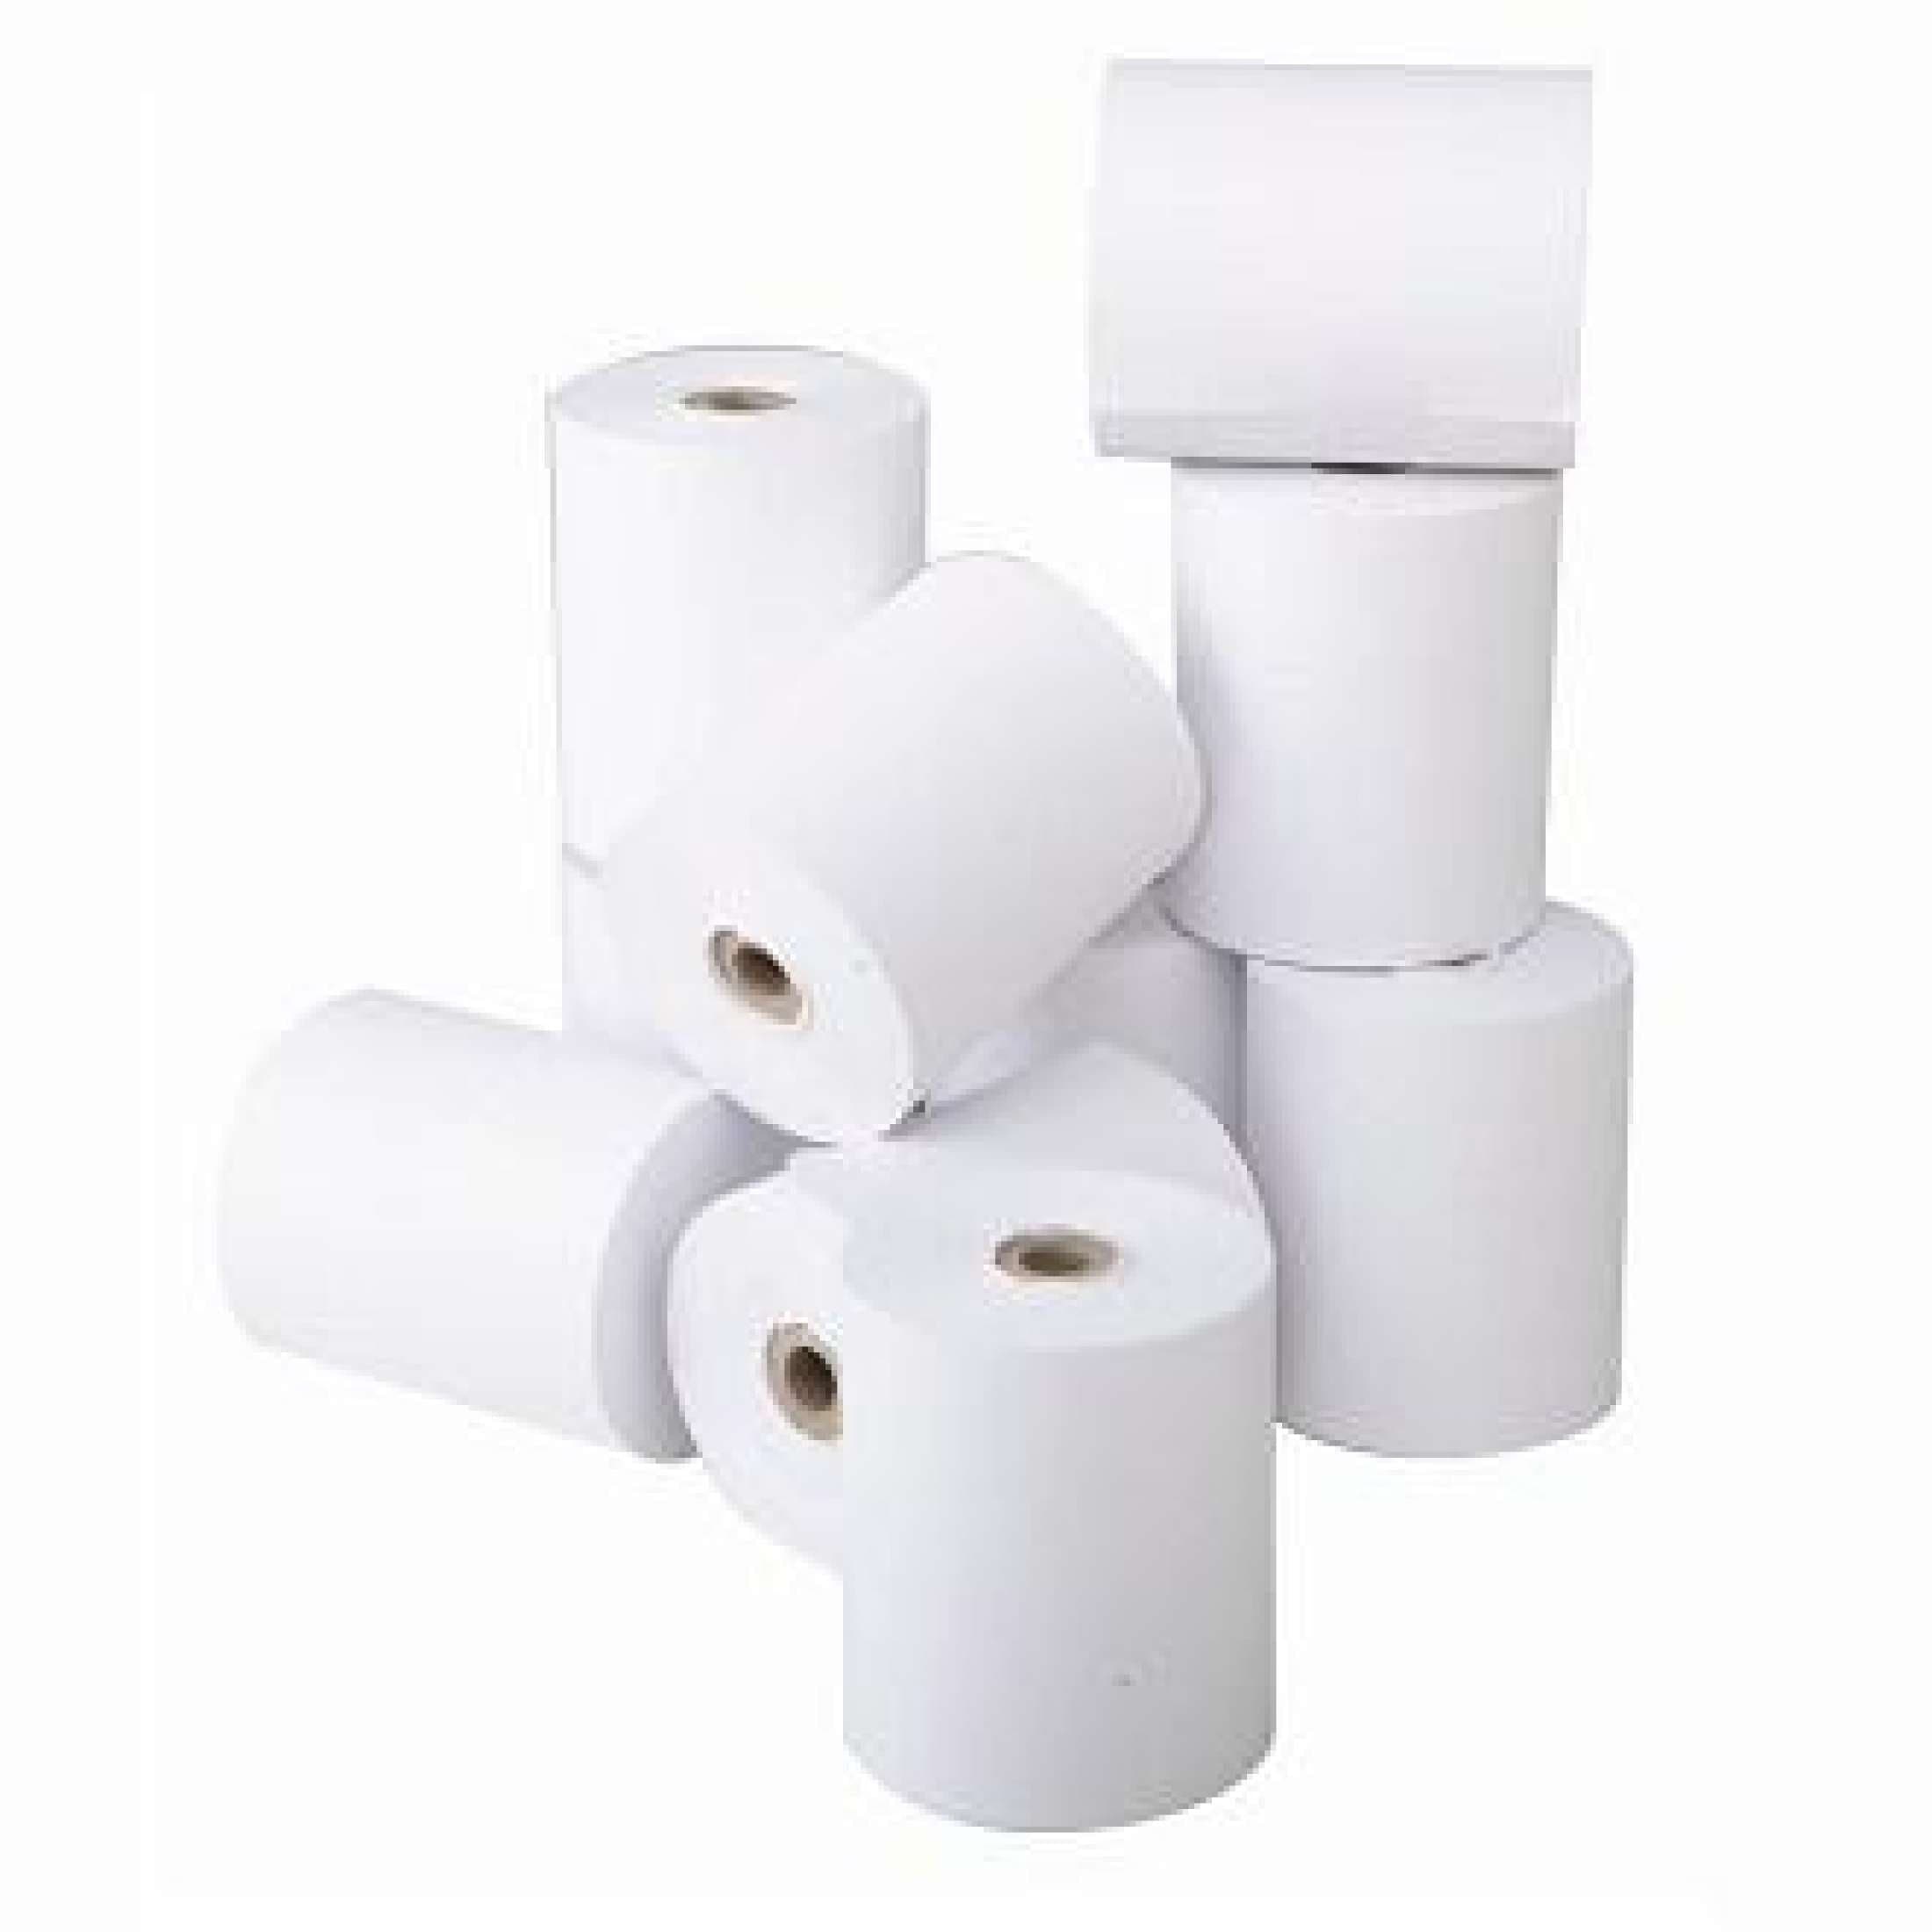 Thermal Roll 3X3 (75M) - White Single Piece